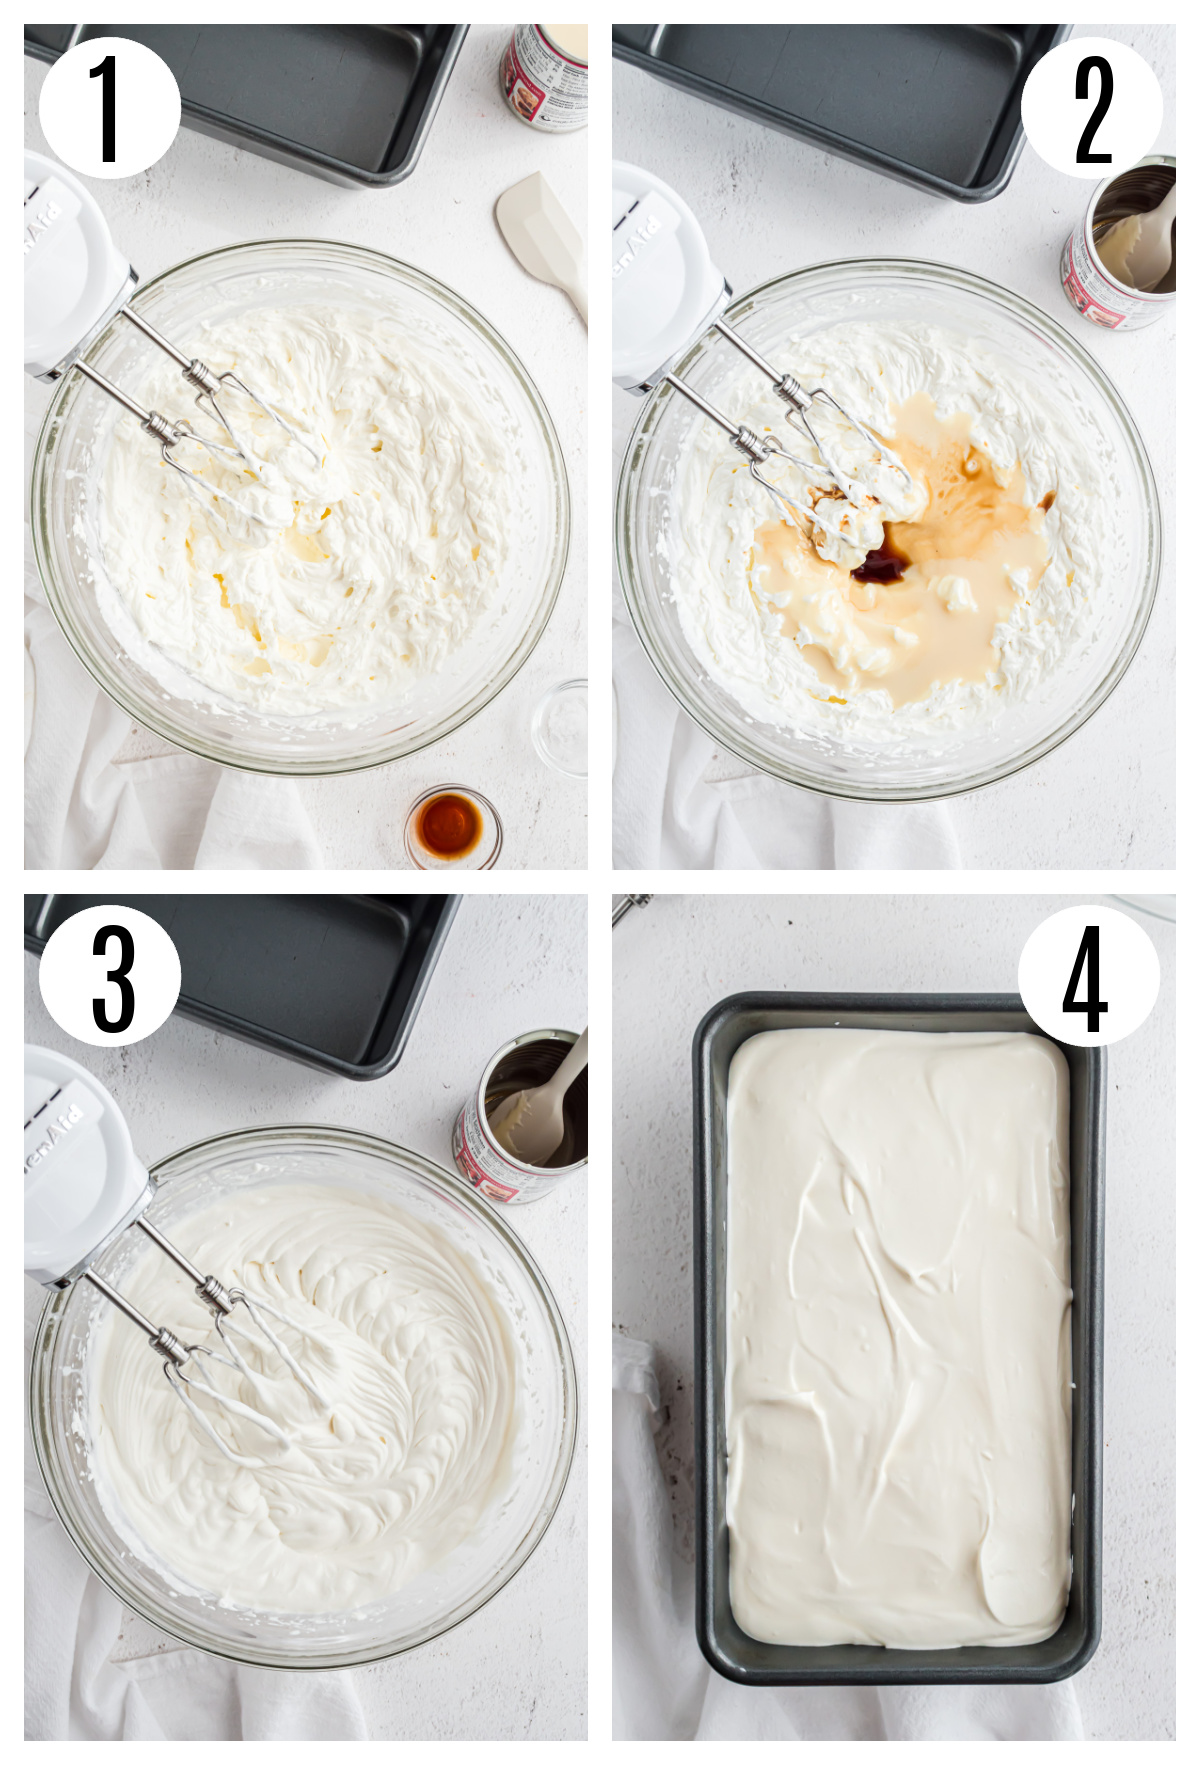 The steps to make this No churn ice cream include whipping the heavy cream until stiff peaks form, adding sweetened condensed milk and vanilla, mixing until smooth and creamy and pouring the mixture into a loaf pan.